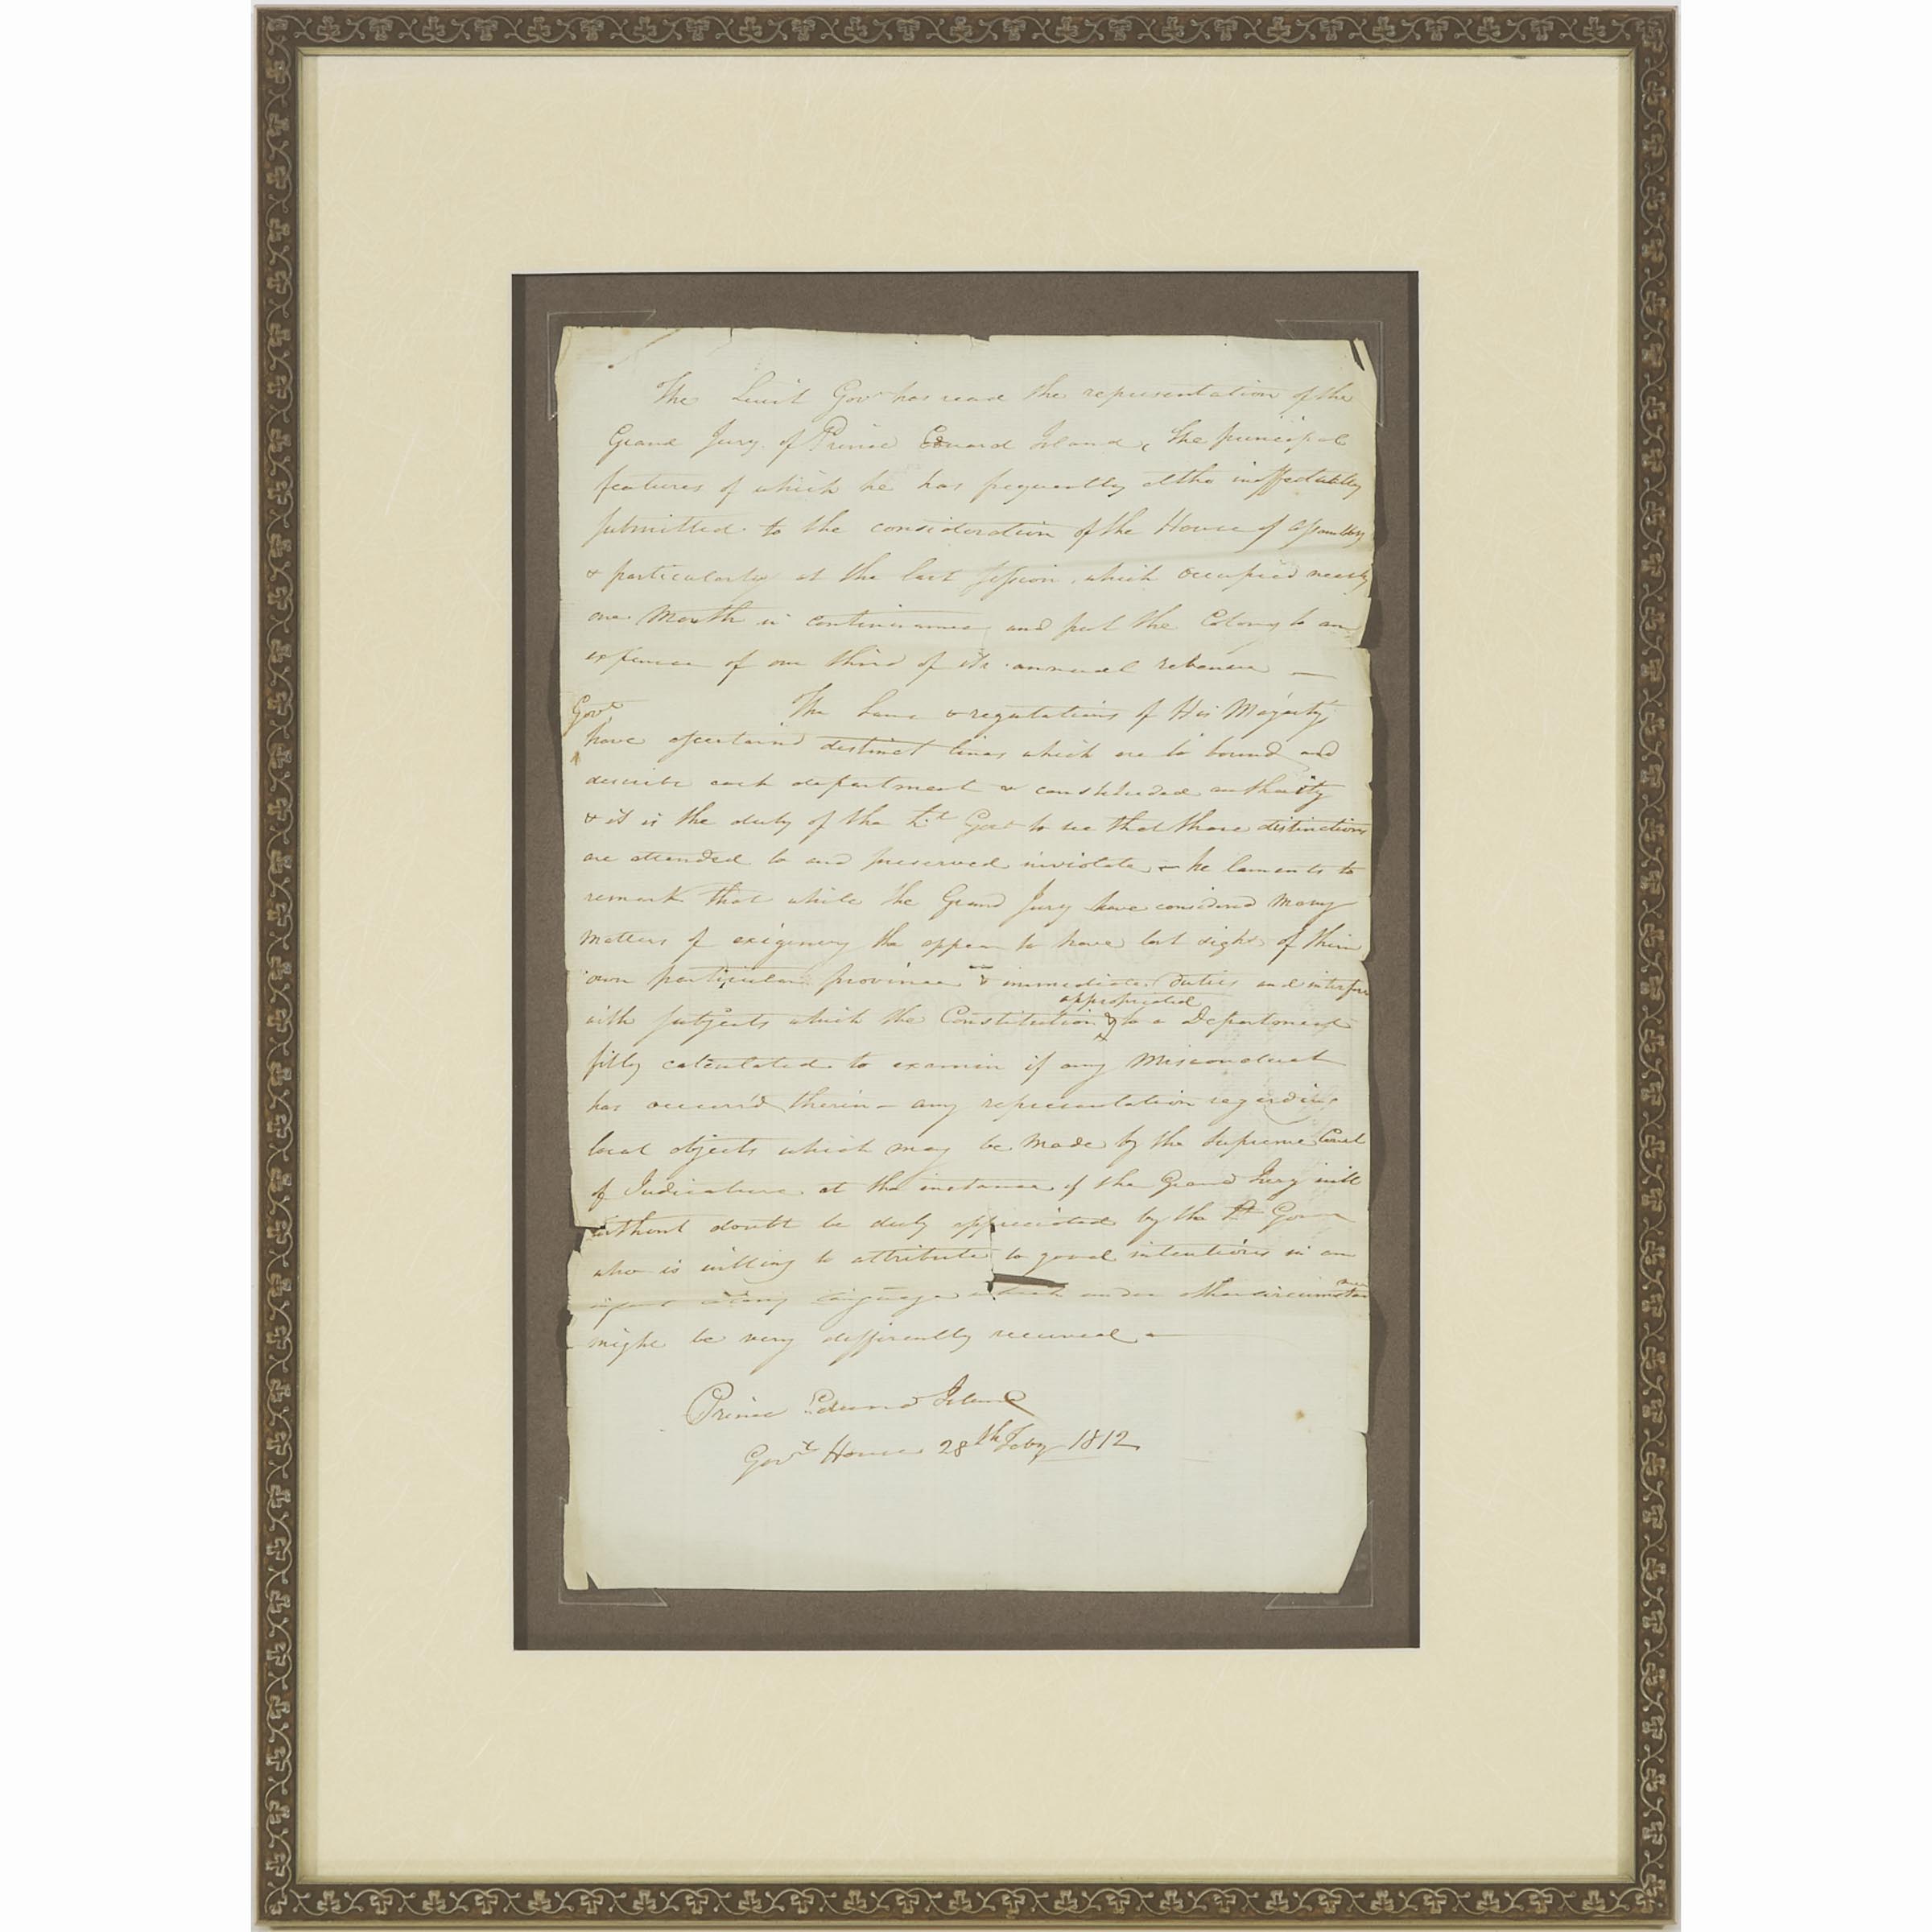 Lt. Governor Joseph Frederick Wallet Des Barres, Prince Edward Island Government House Document, 28th July, 1812